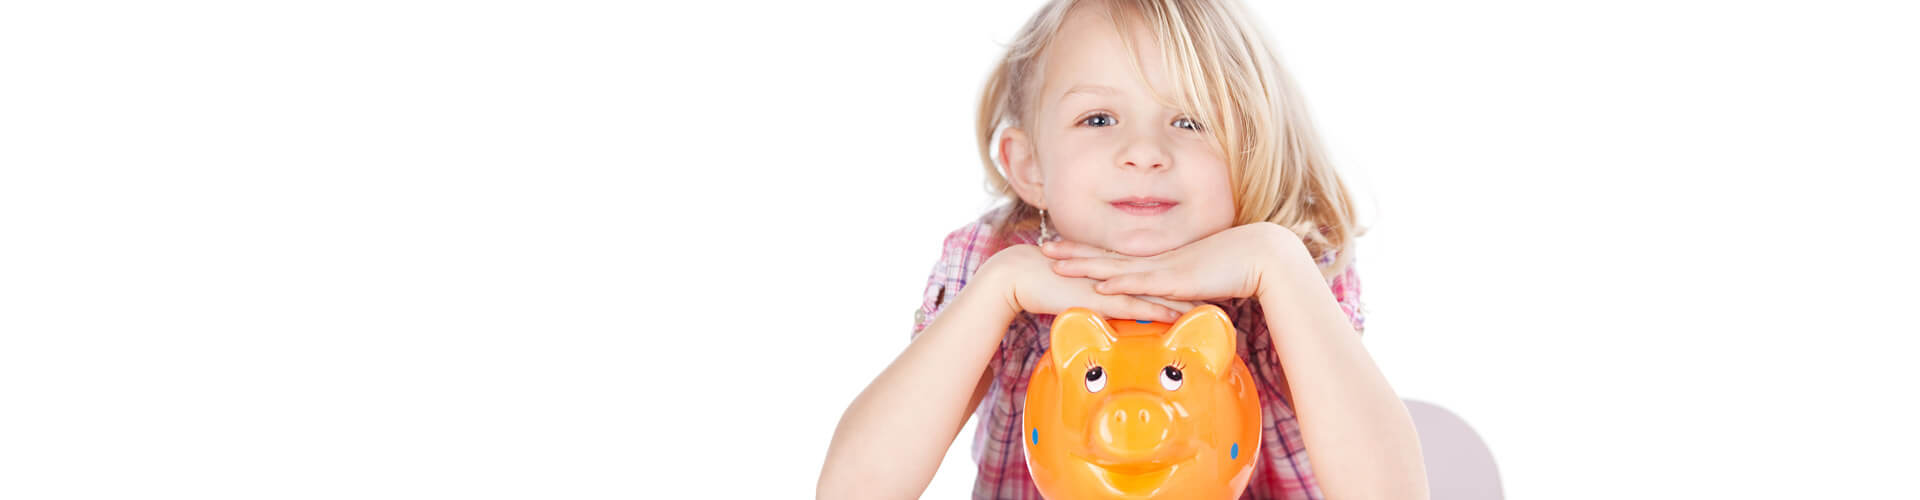 child with piggy bank